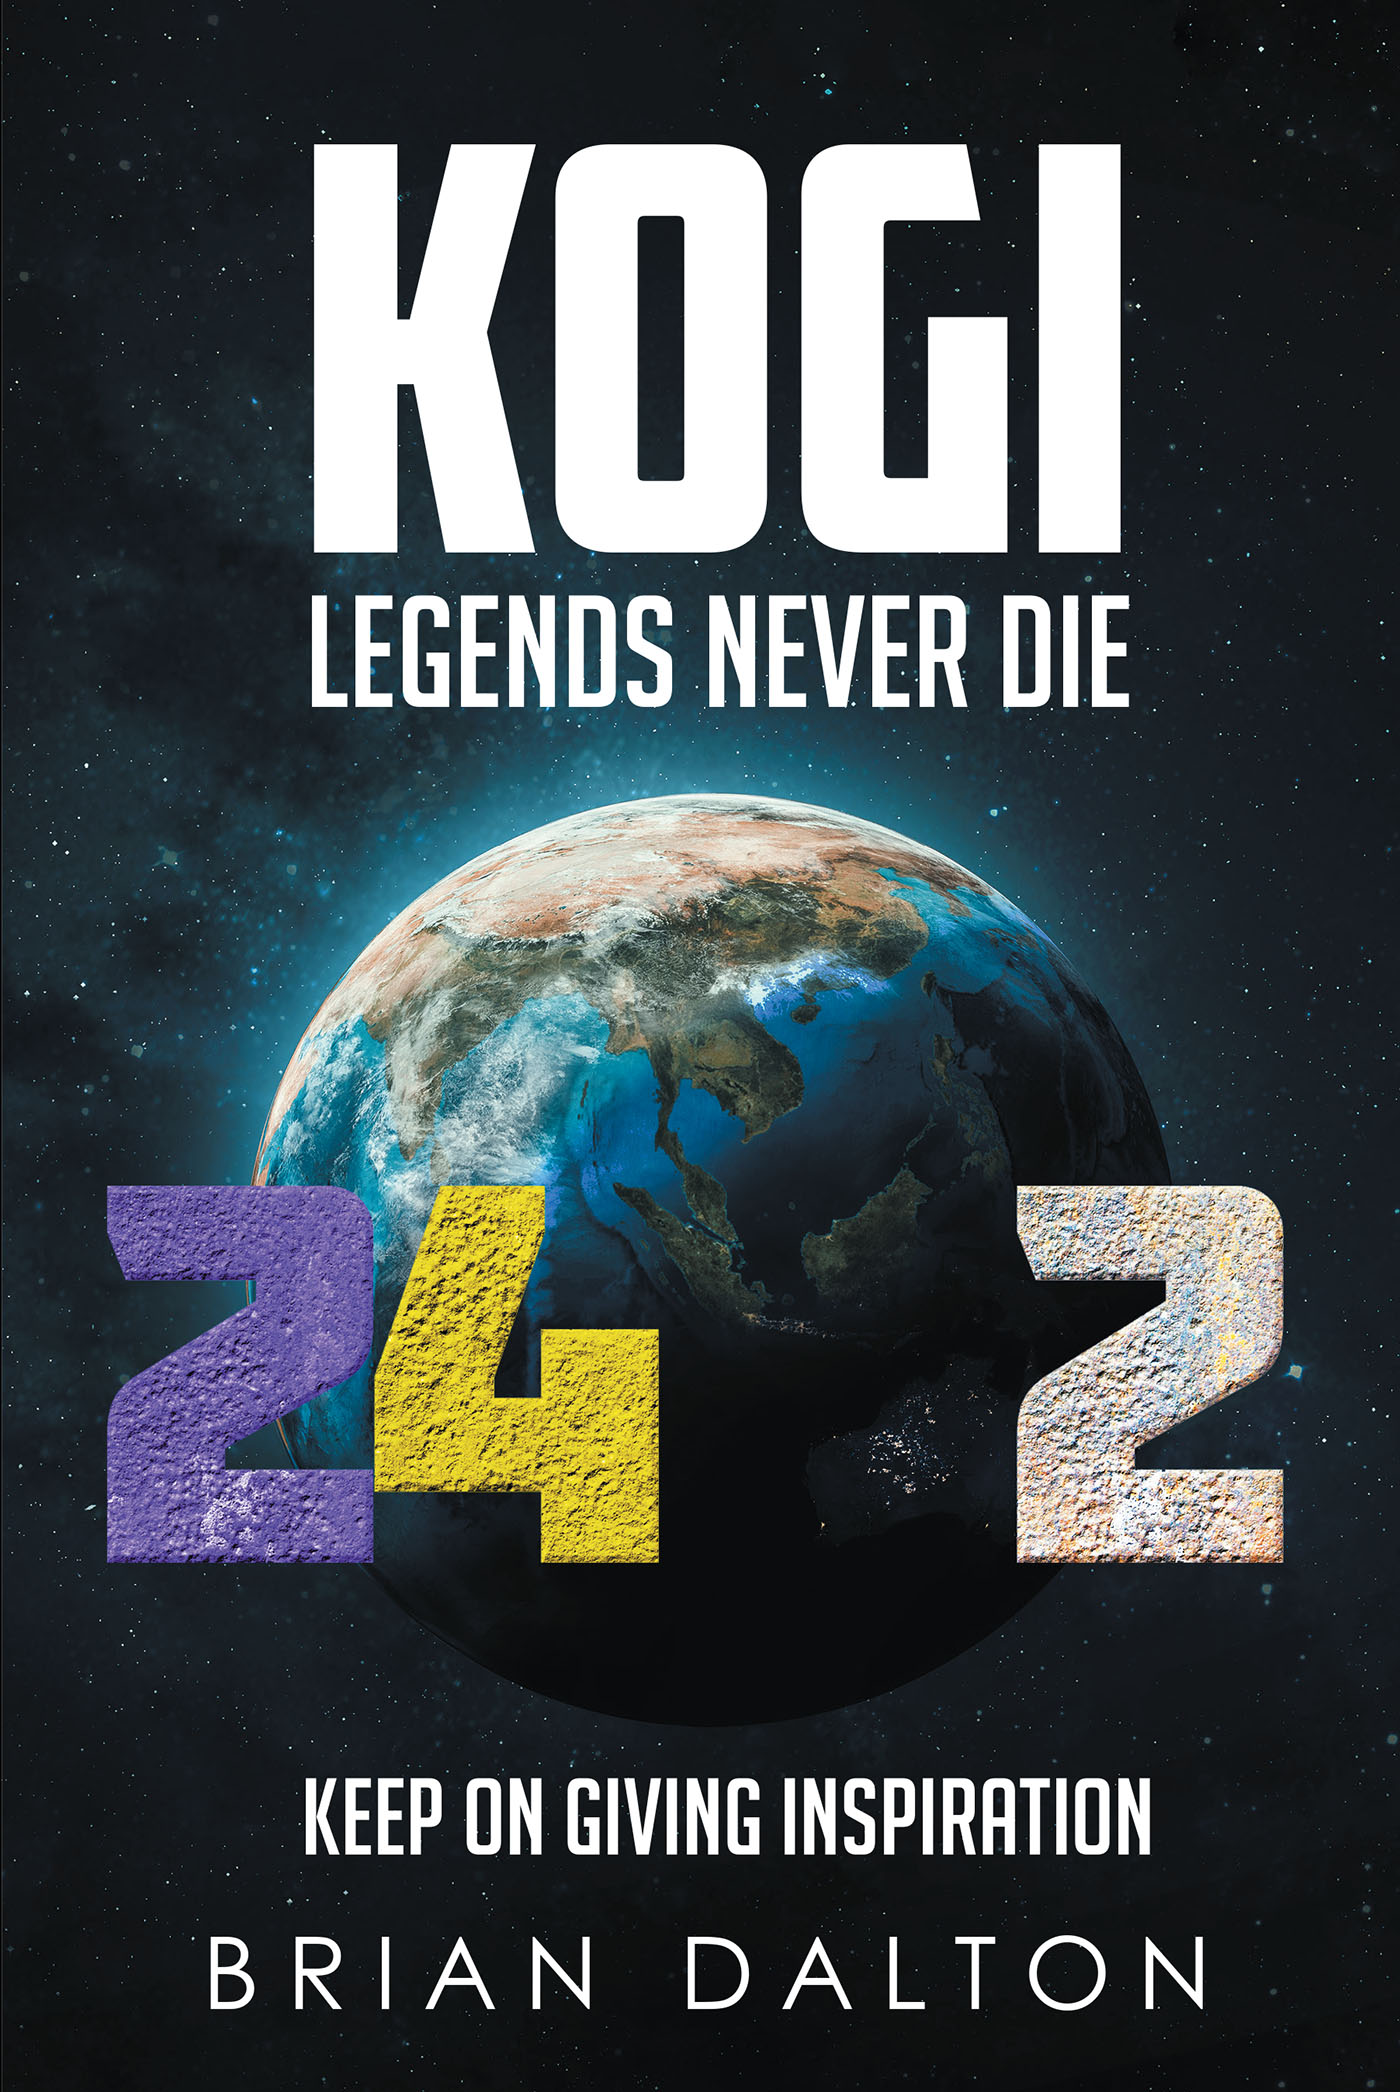 Author Brian Dalton’s New Book, "Kogi: Legends Never Die," is a Dystopian Fantasy Imagining a Future in Which the Fate of Humanity Rests on a Time-Traveling Superstar